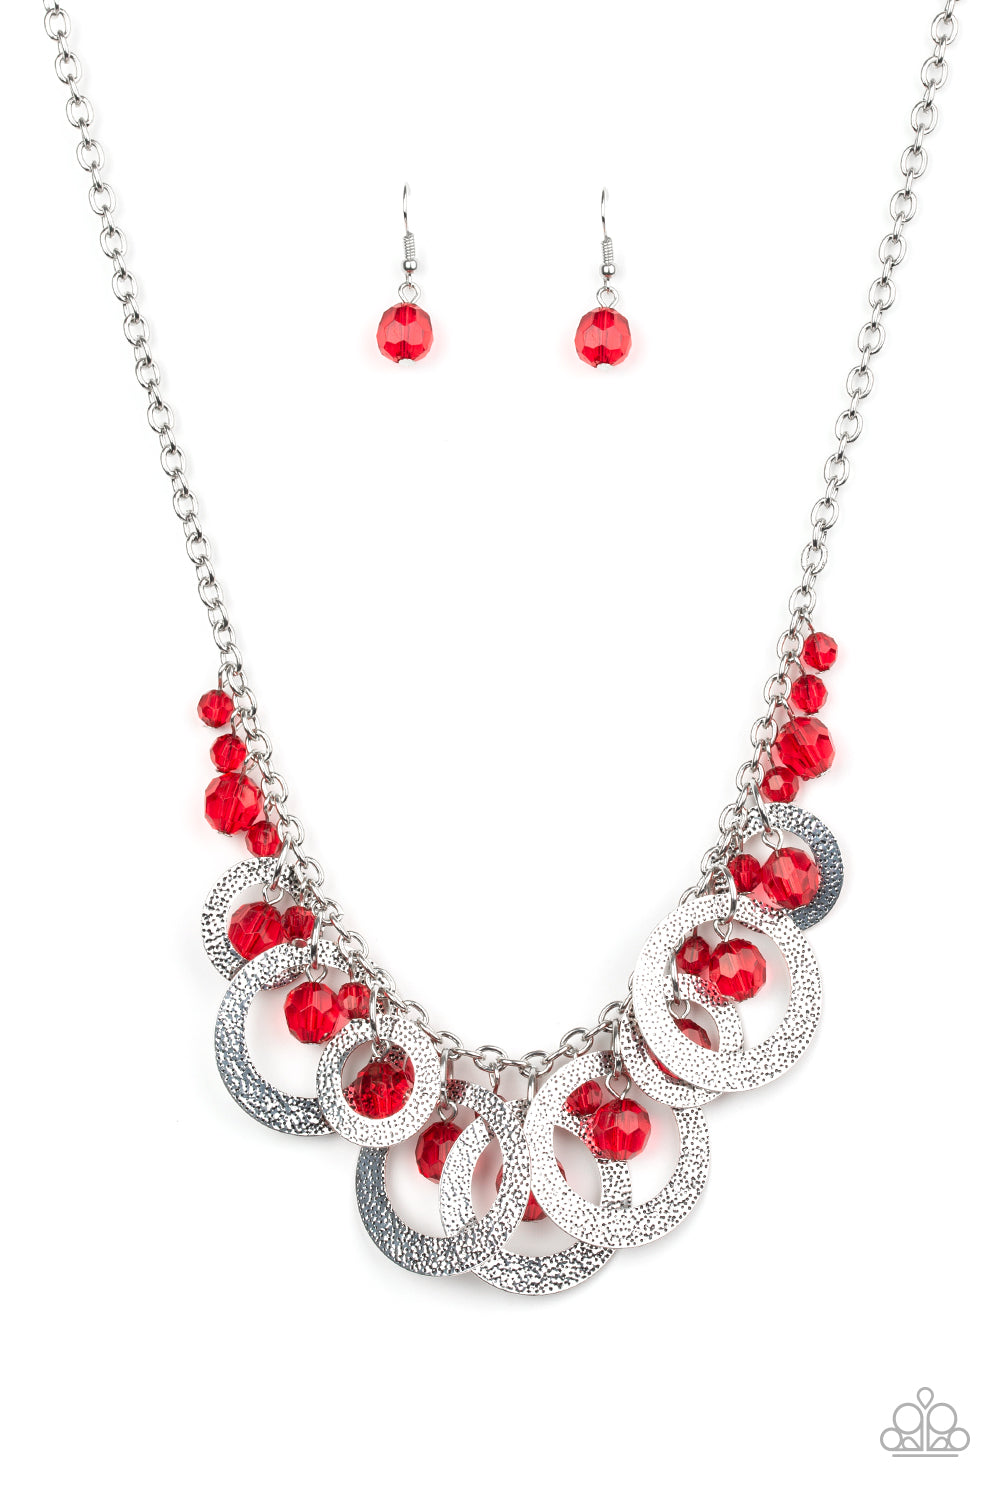 Turn It Up Red Necklace - Paparazzi Accessories